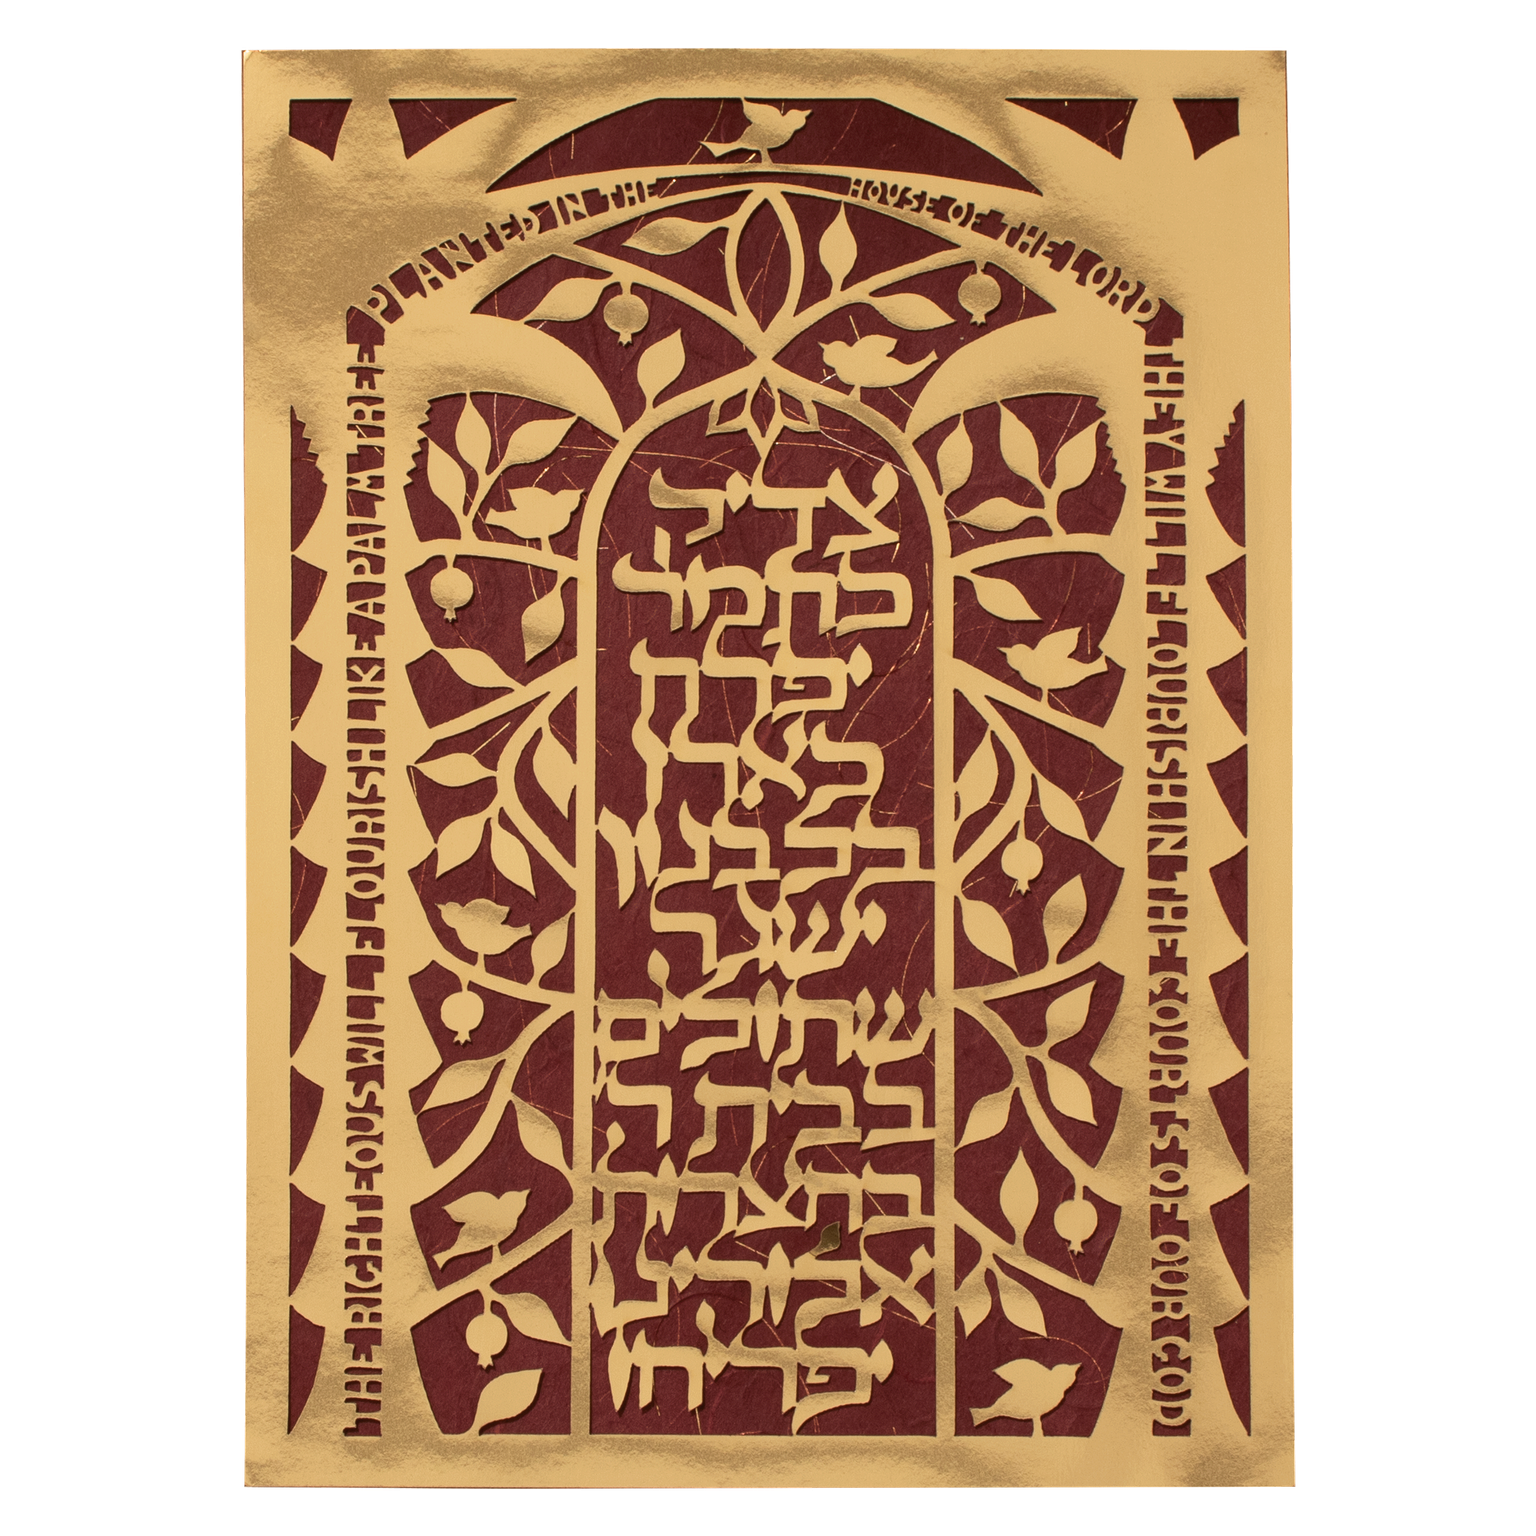 hardcarfter papercut artwork of psalms 92 with red background and gold detailing 